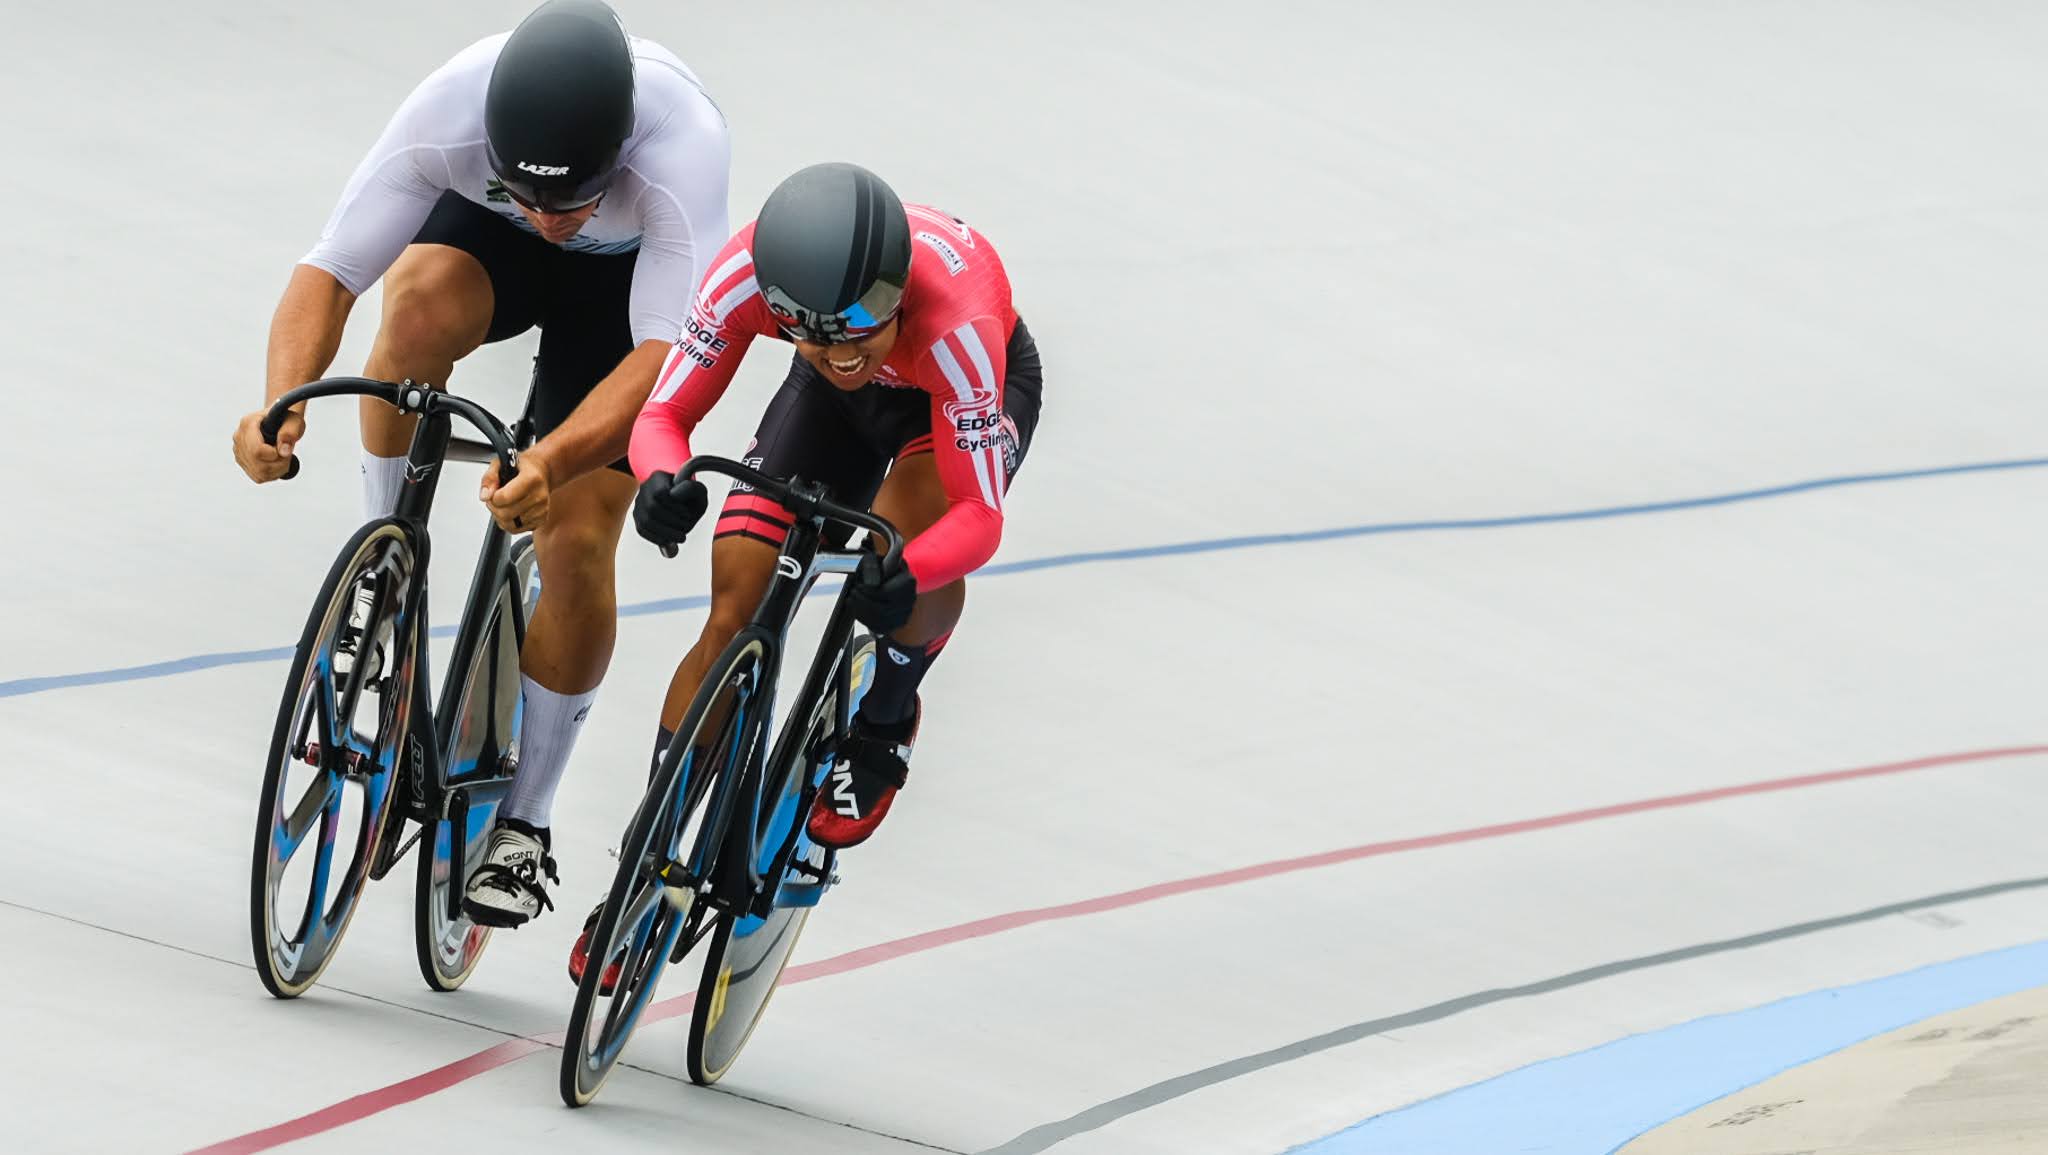 Riders competing in a match sprint